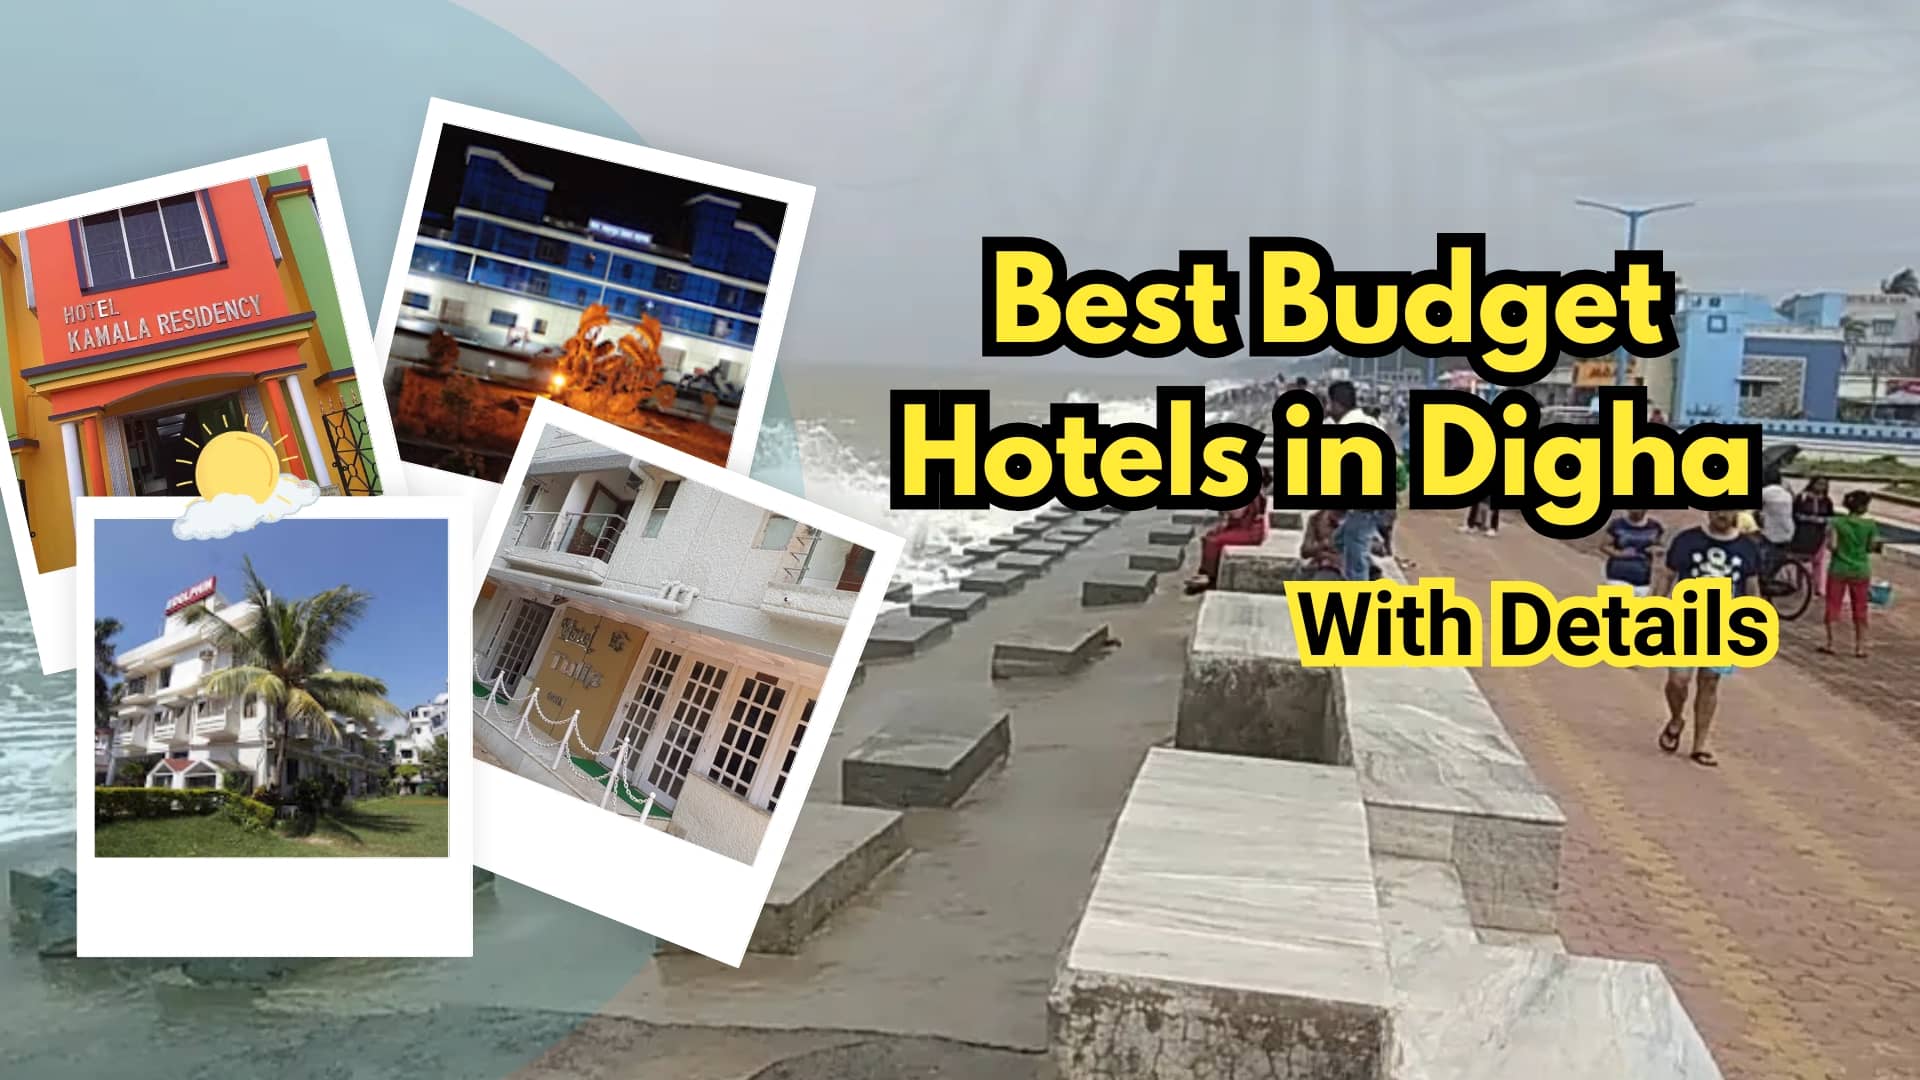 Best Budget Hotels in Digha